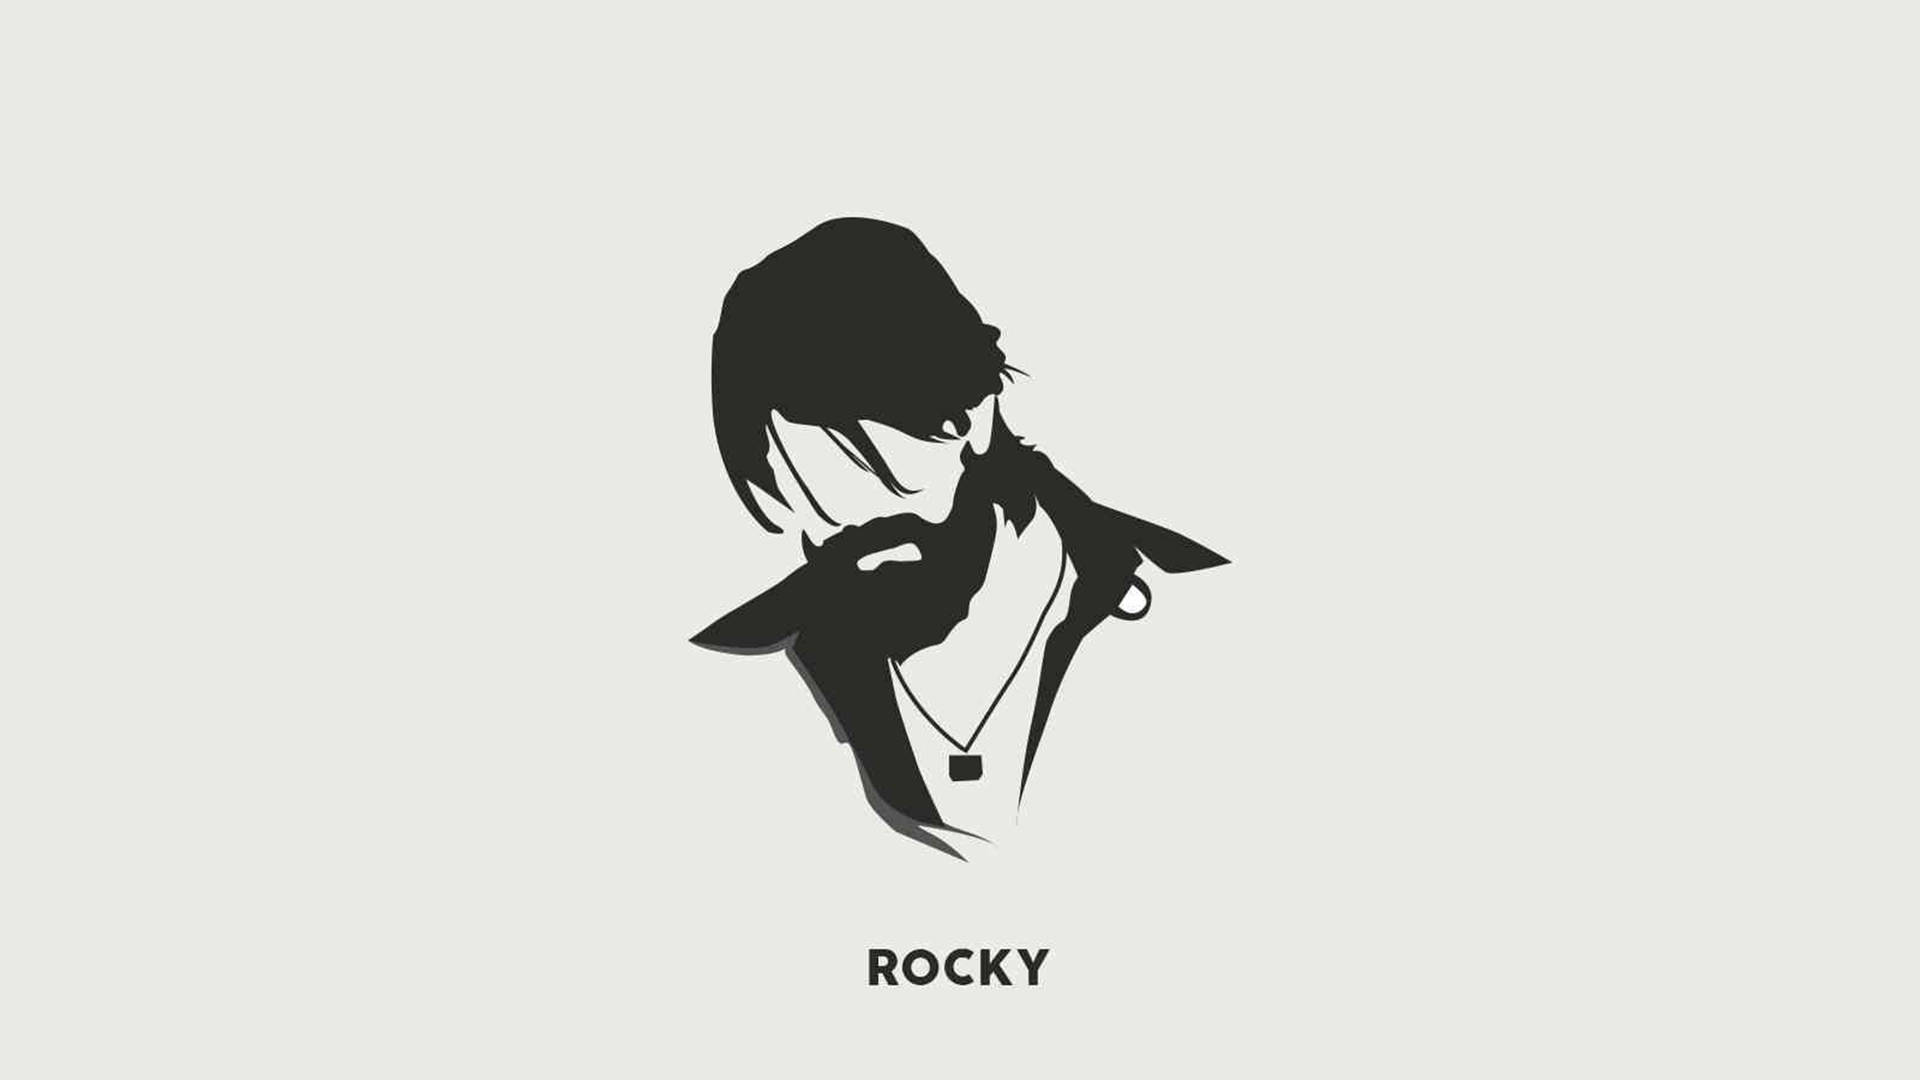 Kgf 4k Rocky Face Silhouette Background